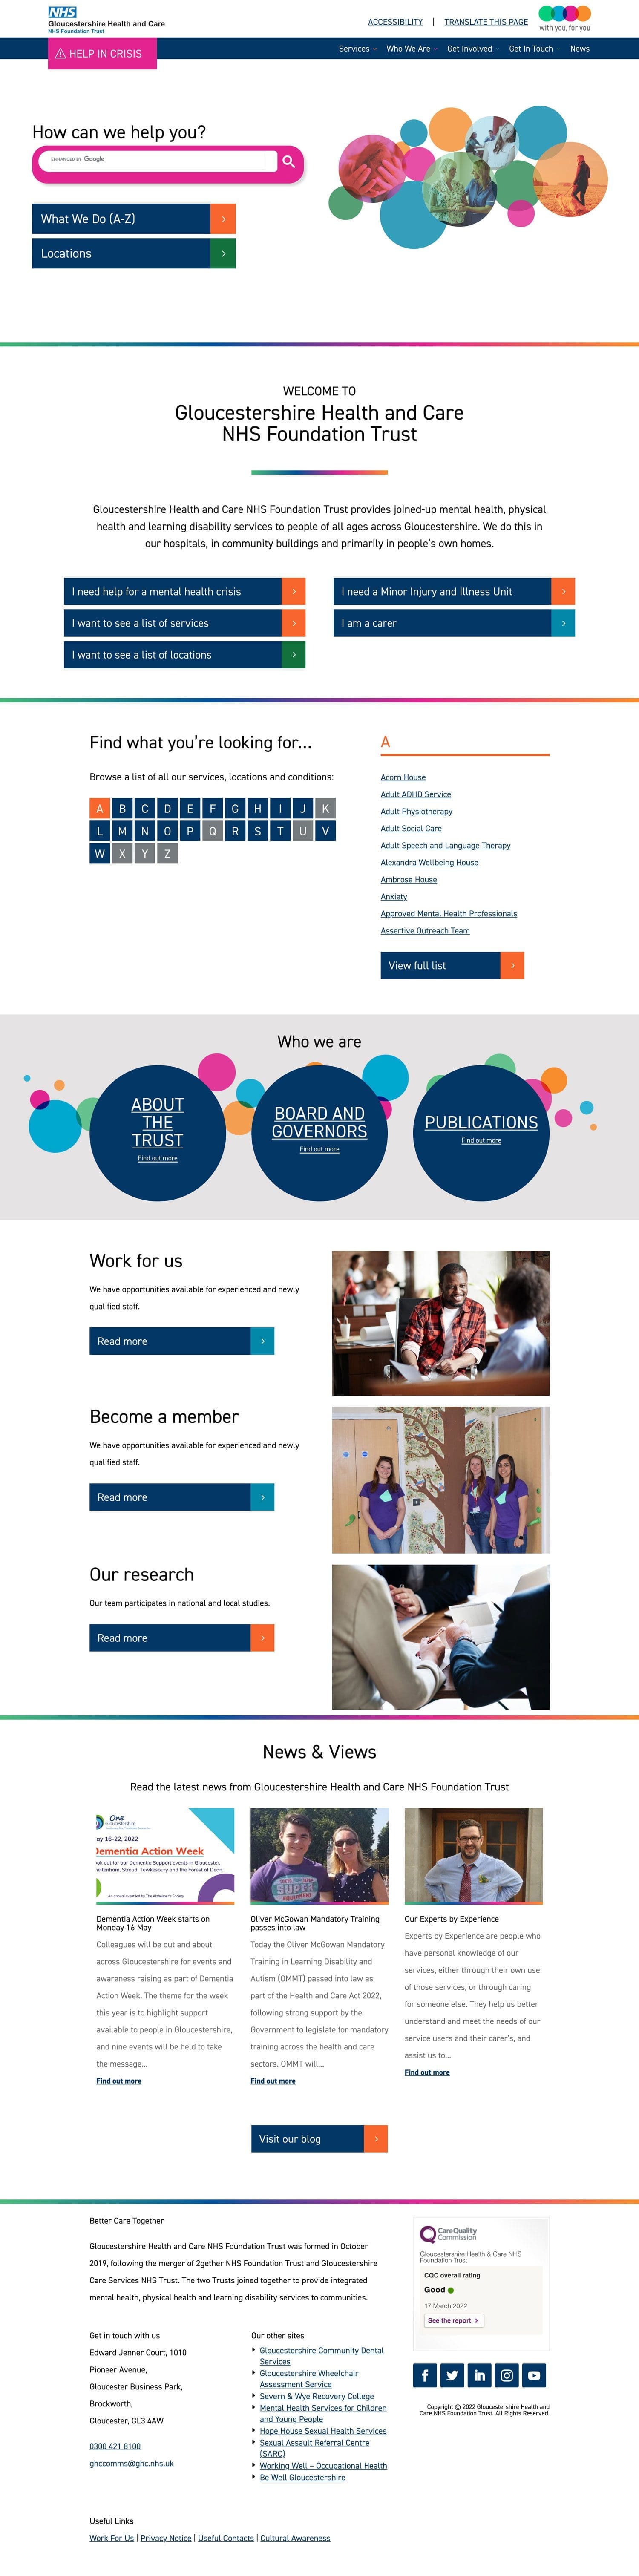 Accessibility Web Design Rules - Our upgraded website for NHS